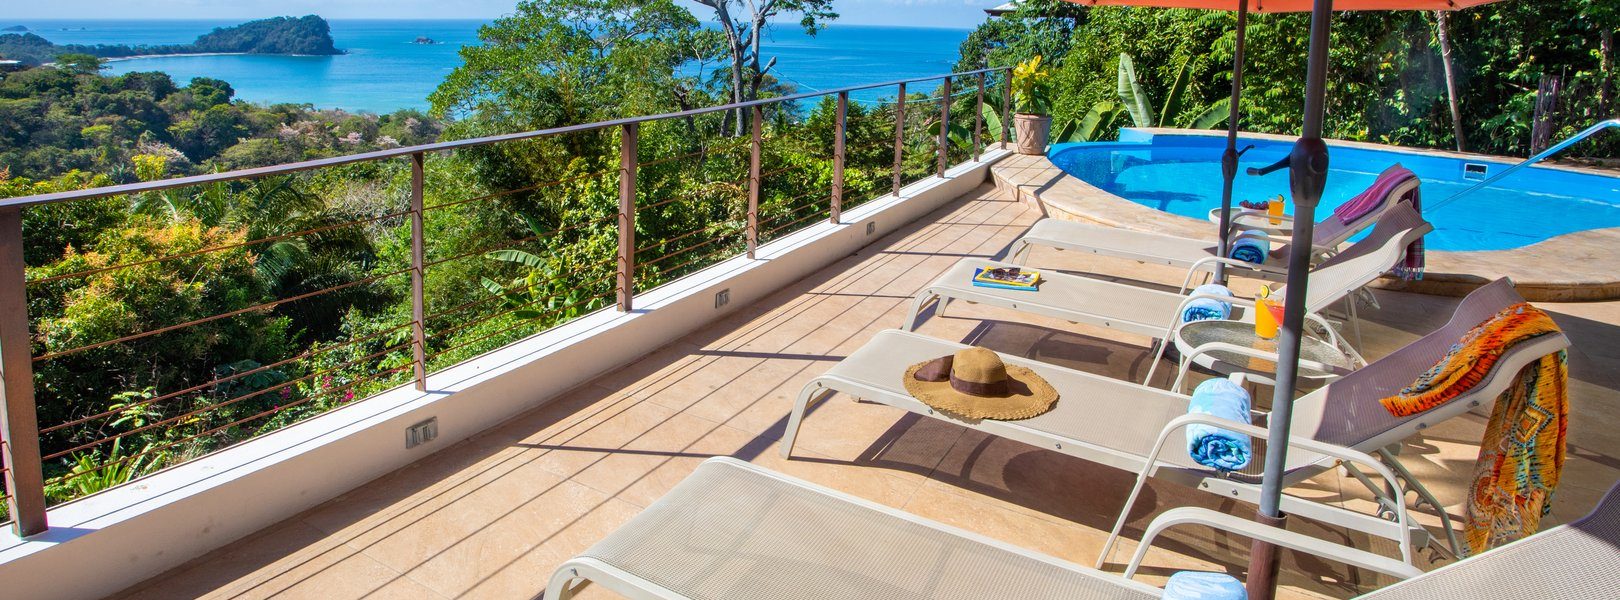 Watch the various wildlife that comes to play near the villa including monkeys, toucans, and scarlet macaws from the pool deck. Note the blue monkey bridge on the right. 